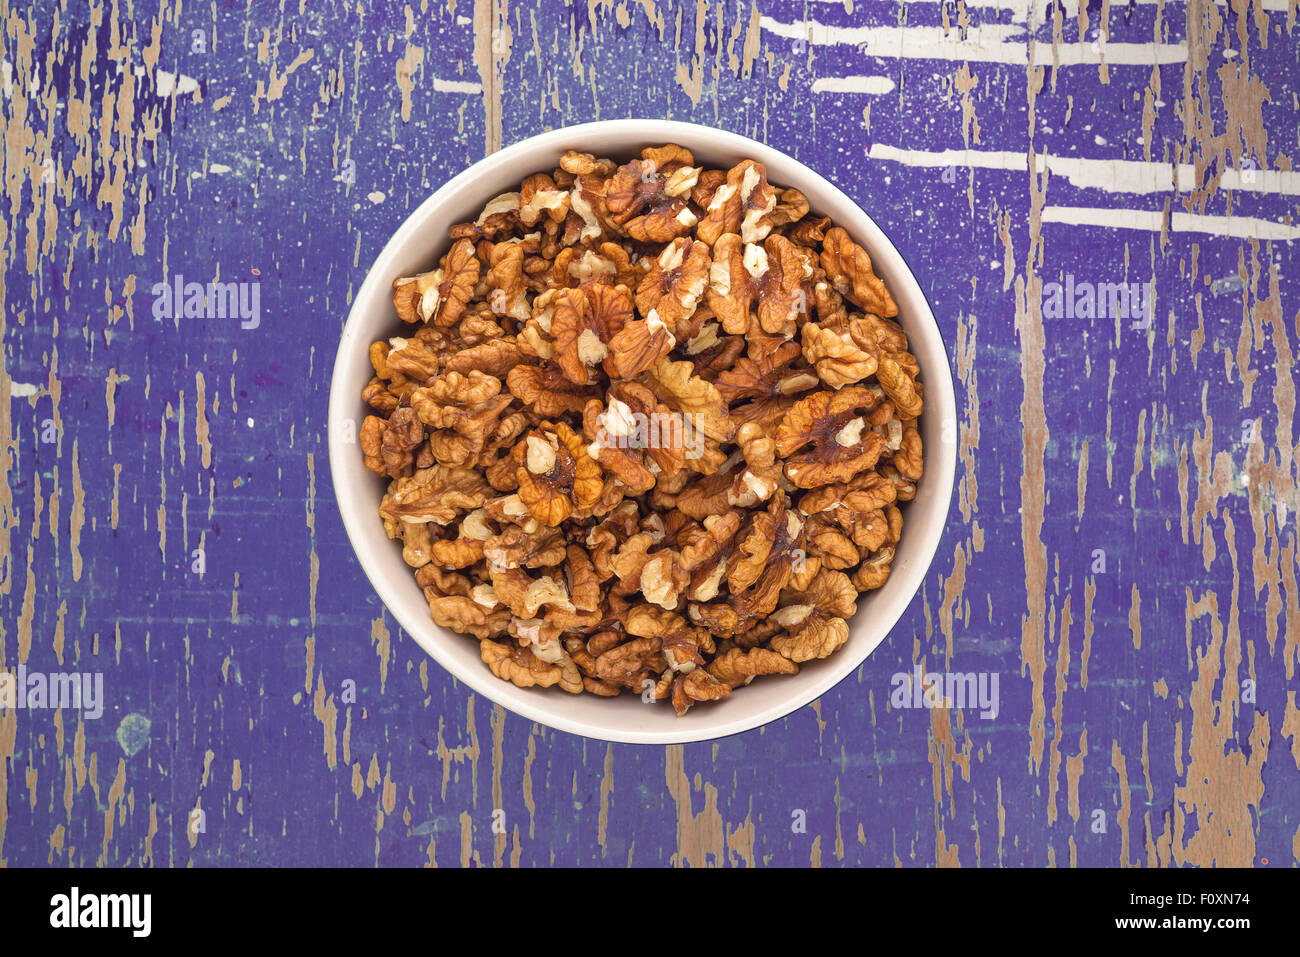 Peeled Walnut Kernels in Ceramic Bowl on Purple Rustic Wood Plank Background, Top View Stock Photo